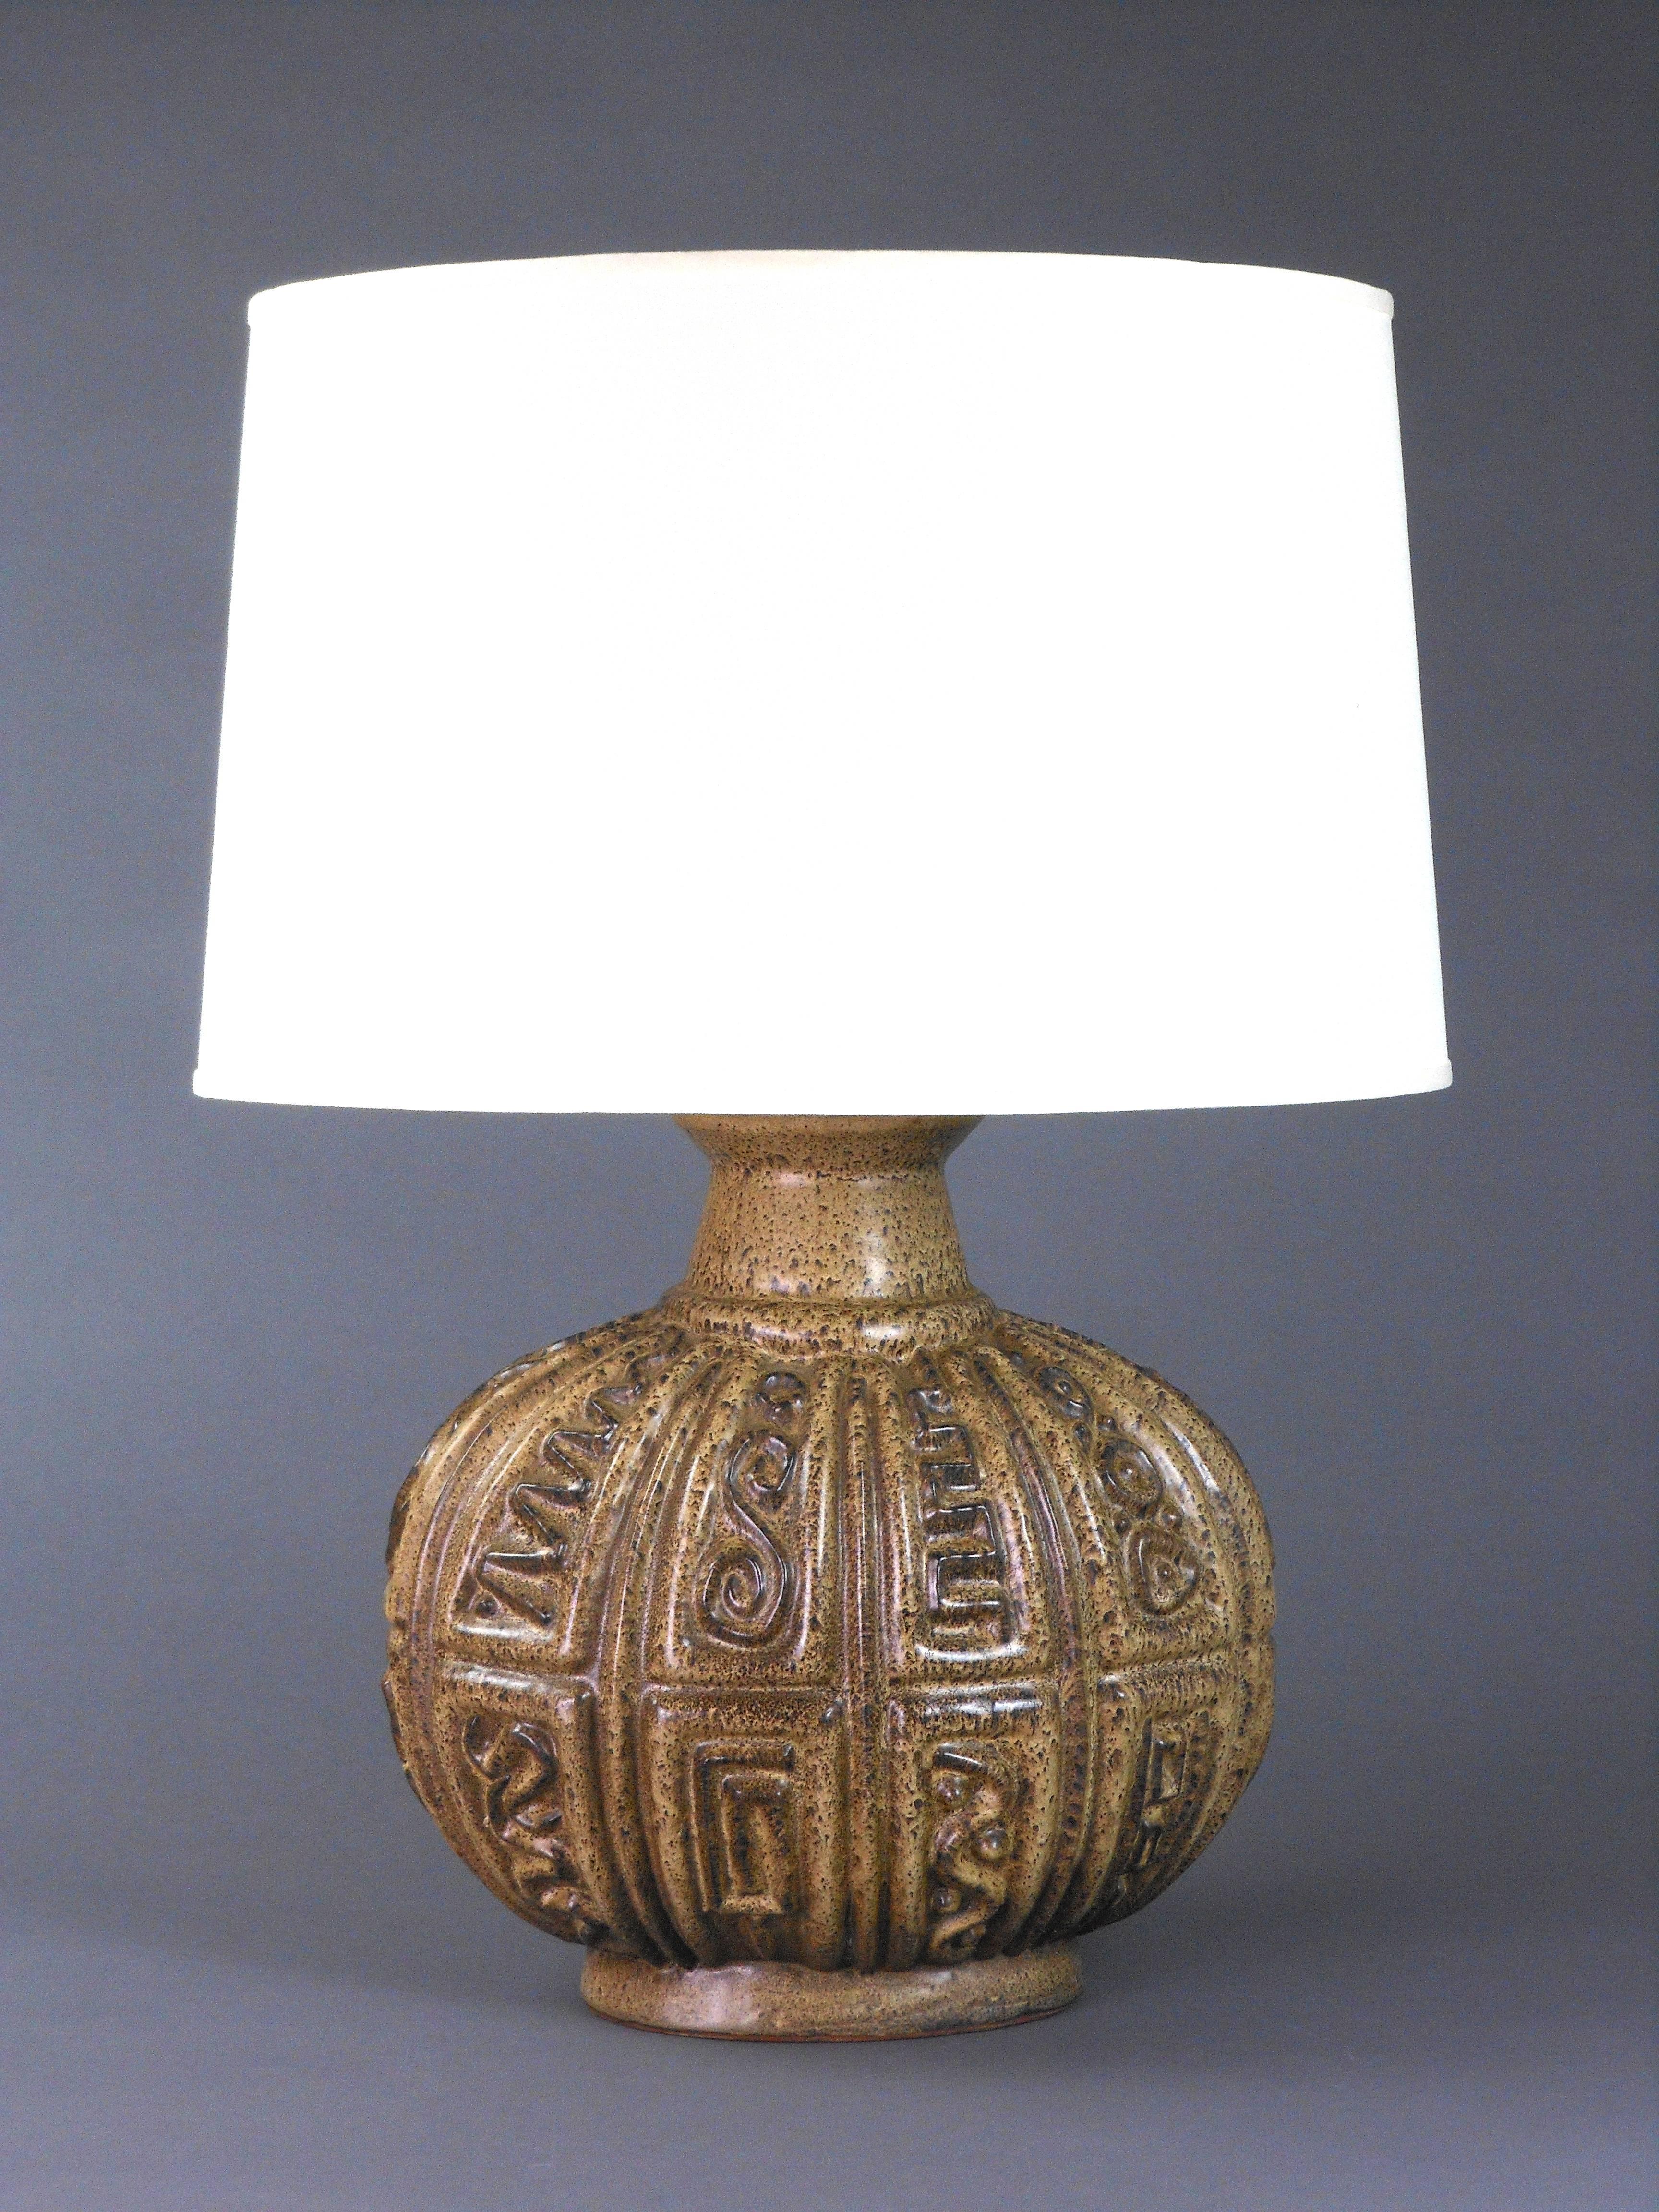 A Mid Century Modern Ceramic Lamp In Good Condition For Sale In New York, NY